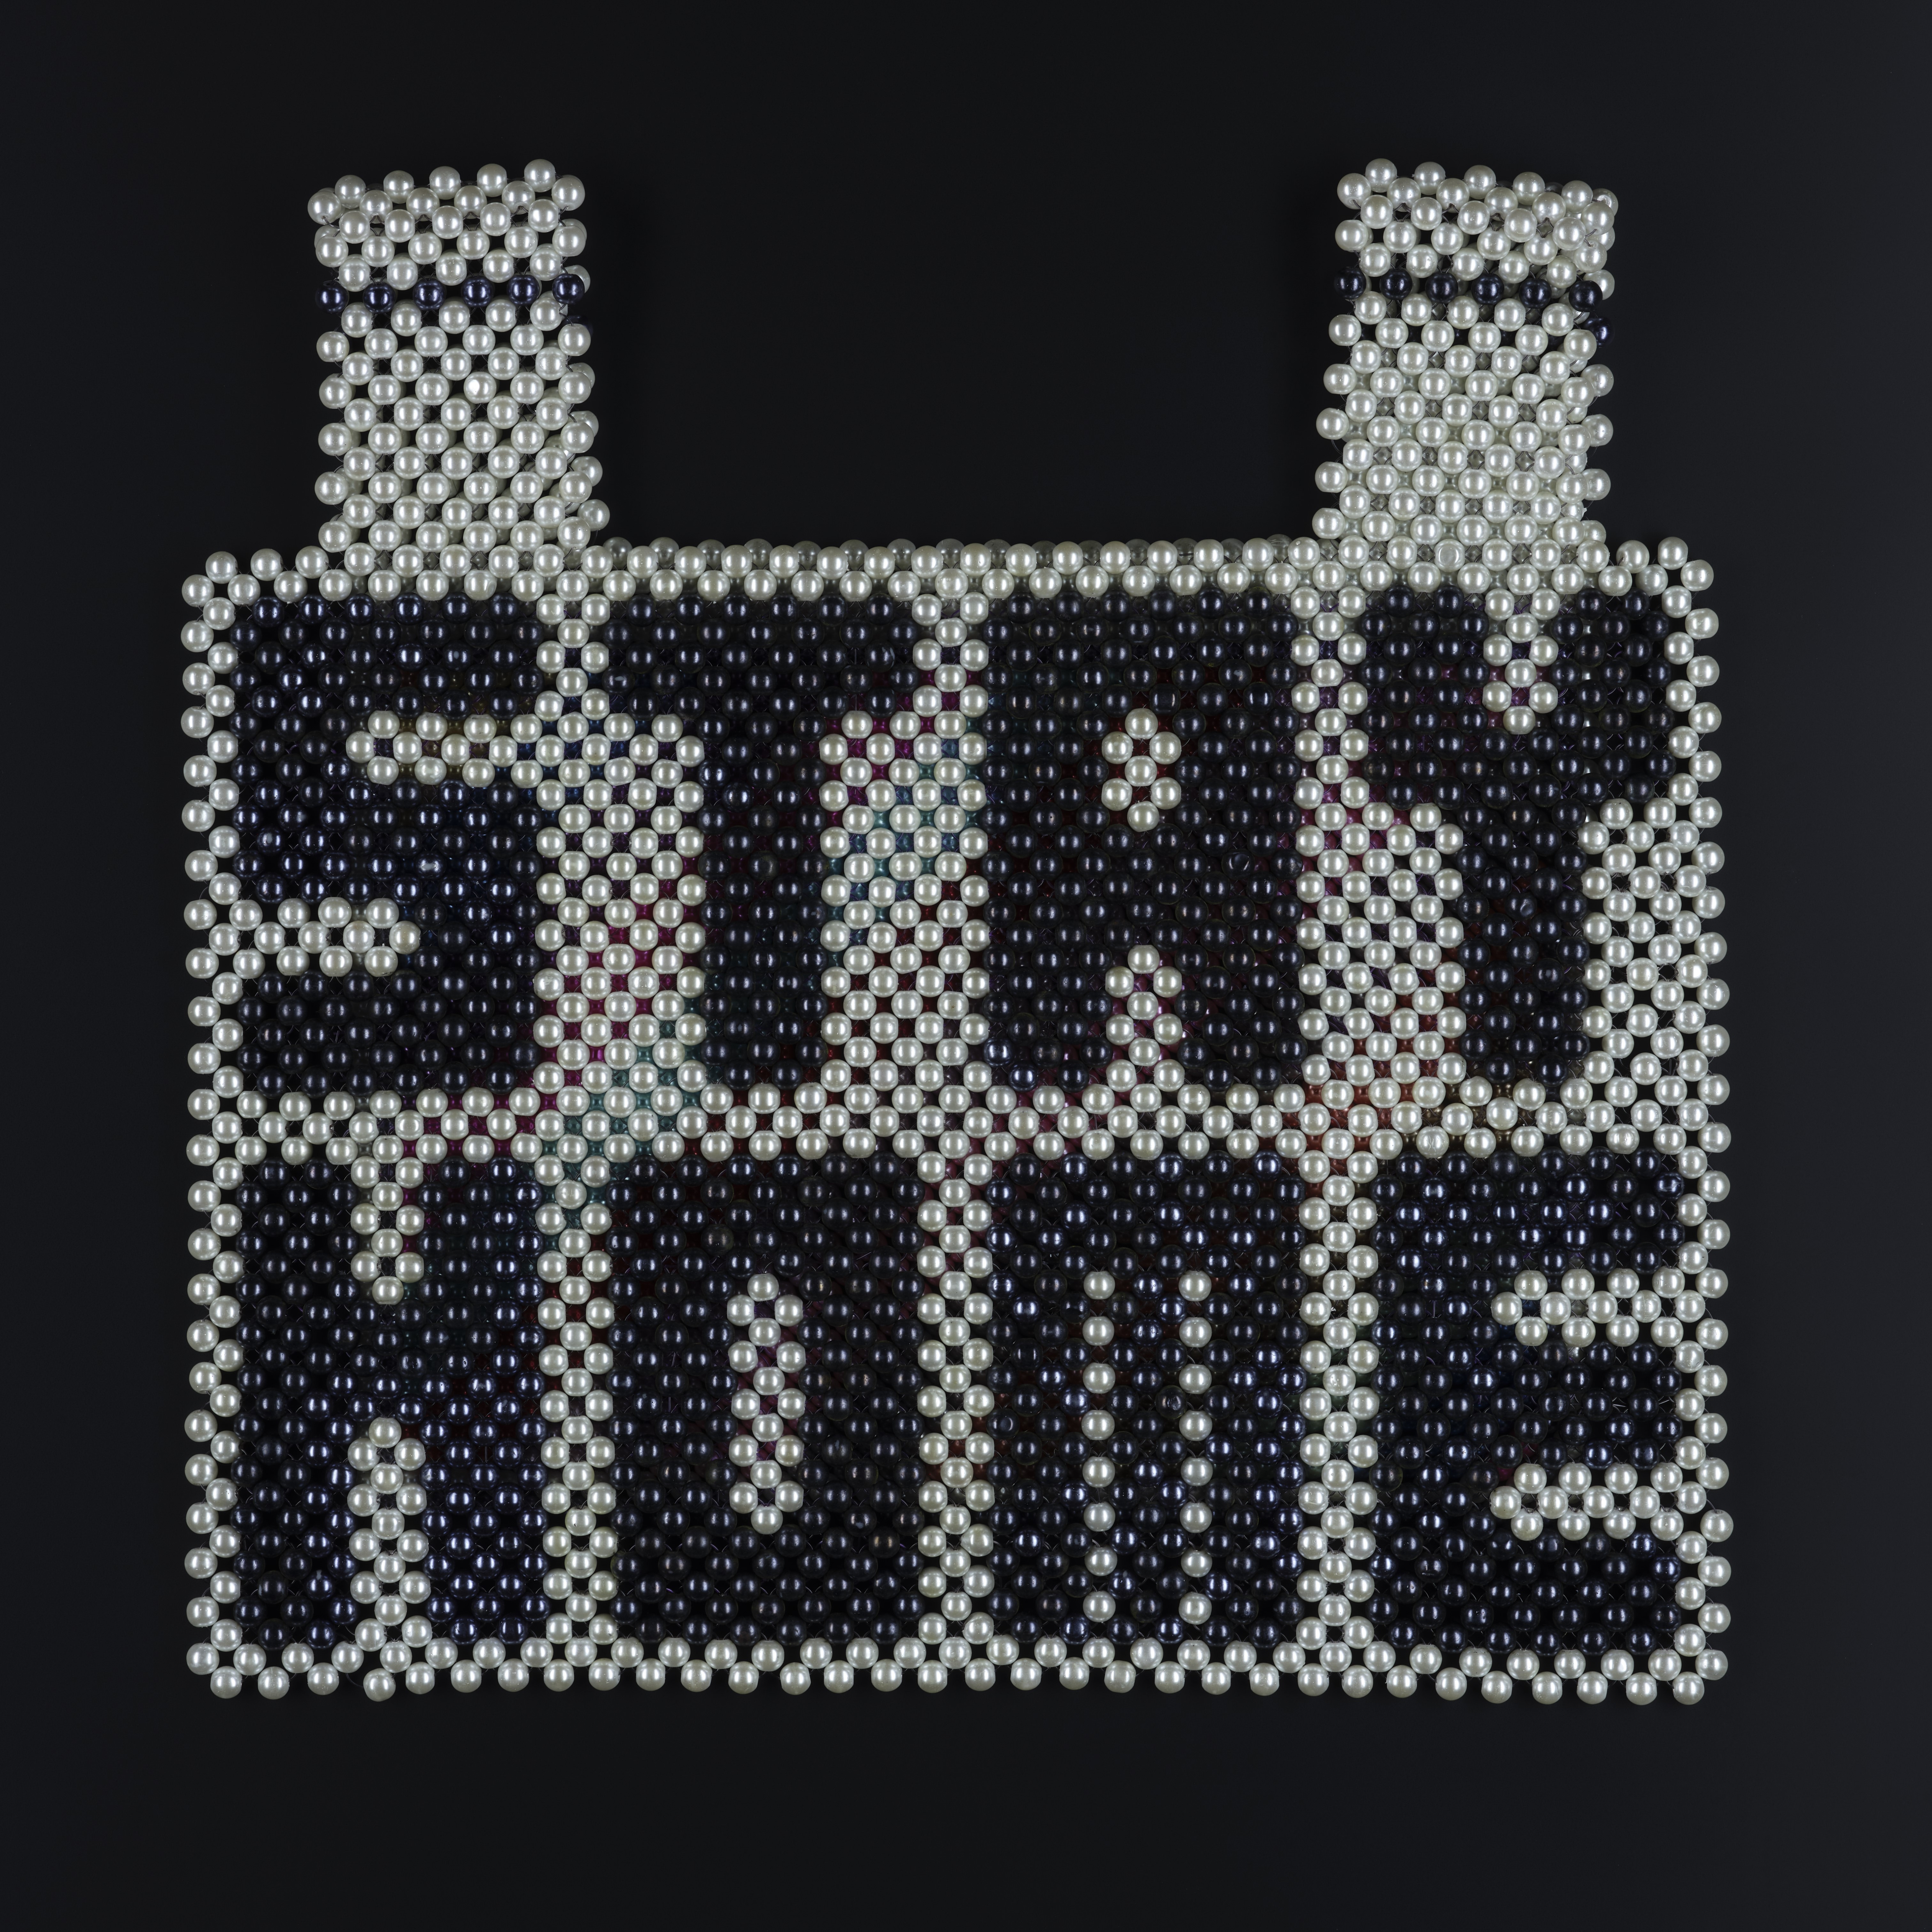 ‘Stay Home!’, breastplate and backpiece, by Sera Park Choi, Rhode Island, USA (2020). K.2021.5. Created at the start of 2020, when the world shut down, ‘Stay Home!’ a protective beaded vest by Sera Park Choi, resonates with the global situation at the time, and the order from governments around the world to ʻStay Home’. Her work also draws attention to the societal racism which continues to be levelled at Asian communities.